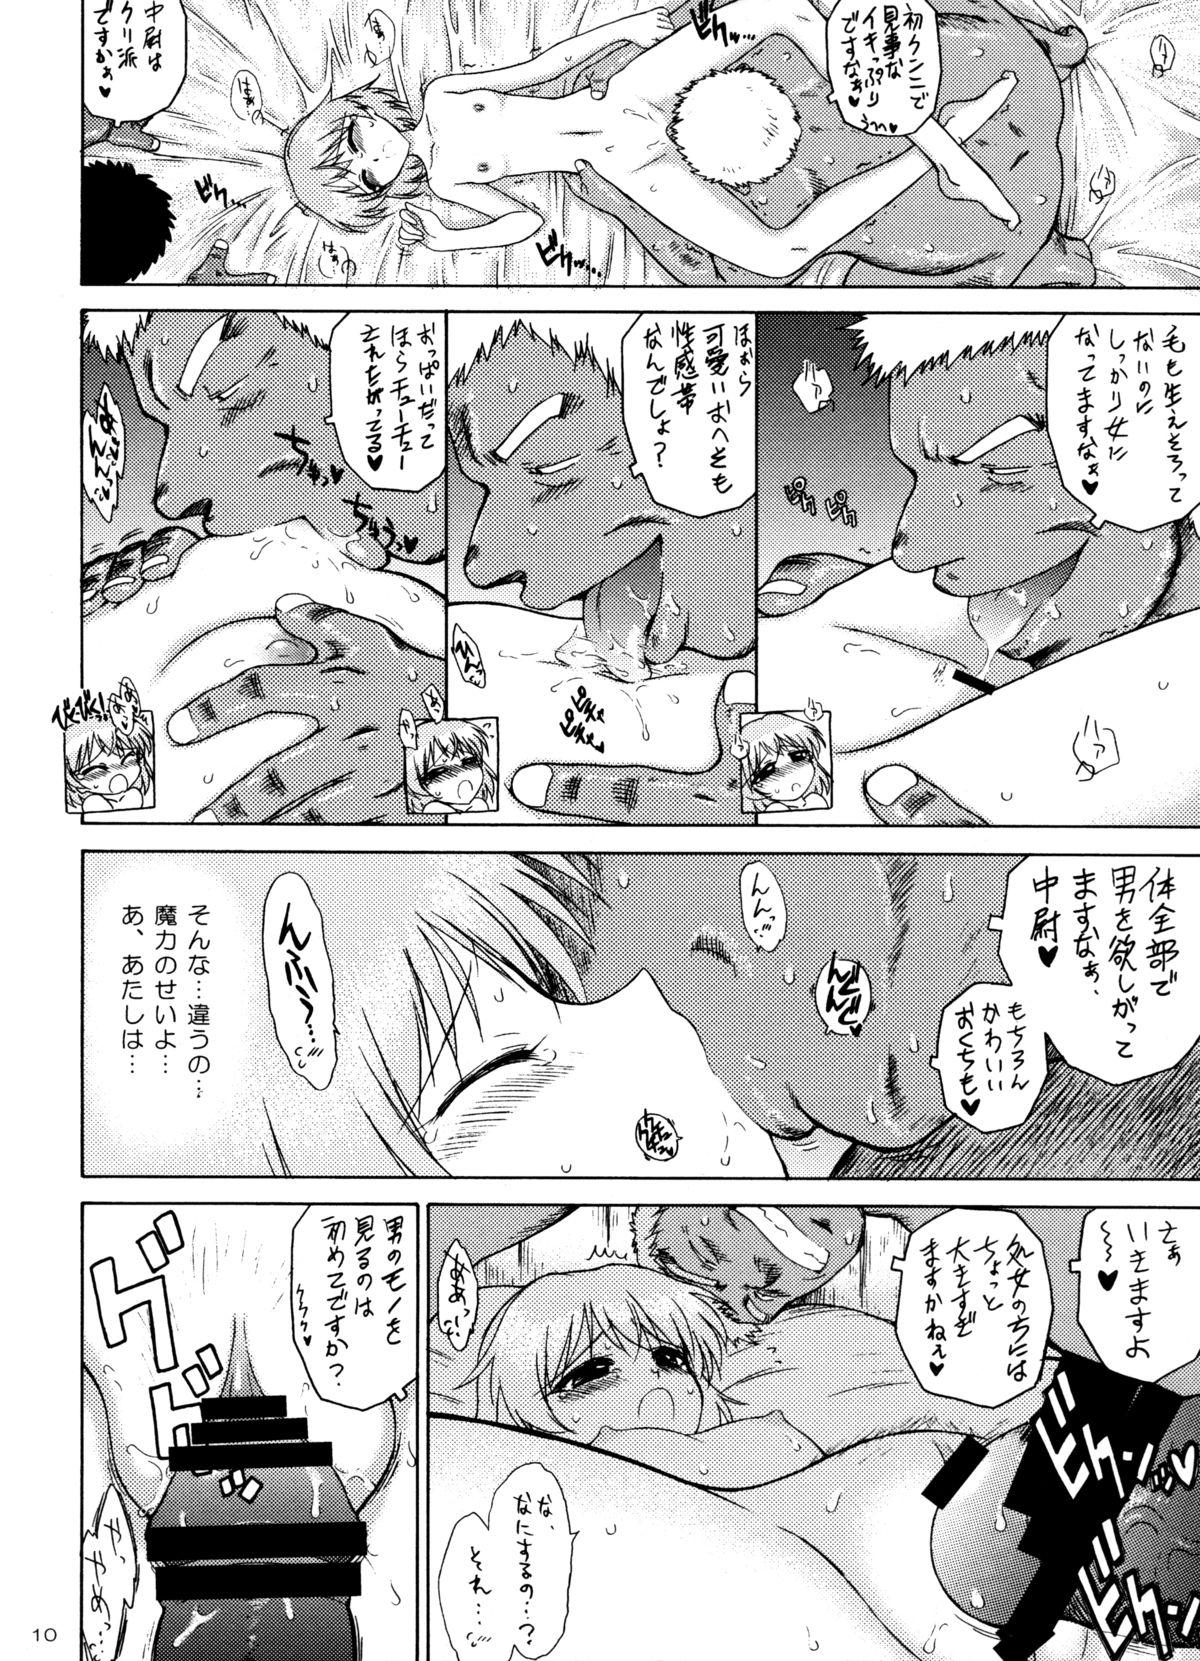 Mask SURVIVOR - Strike witches Free Real Porn - Page 9